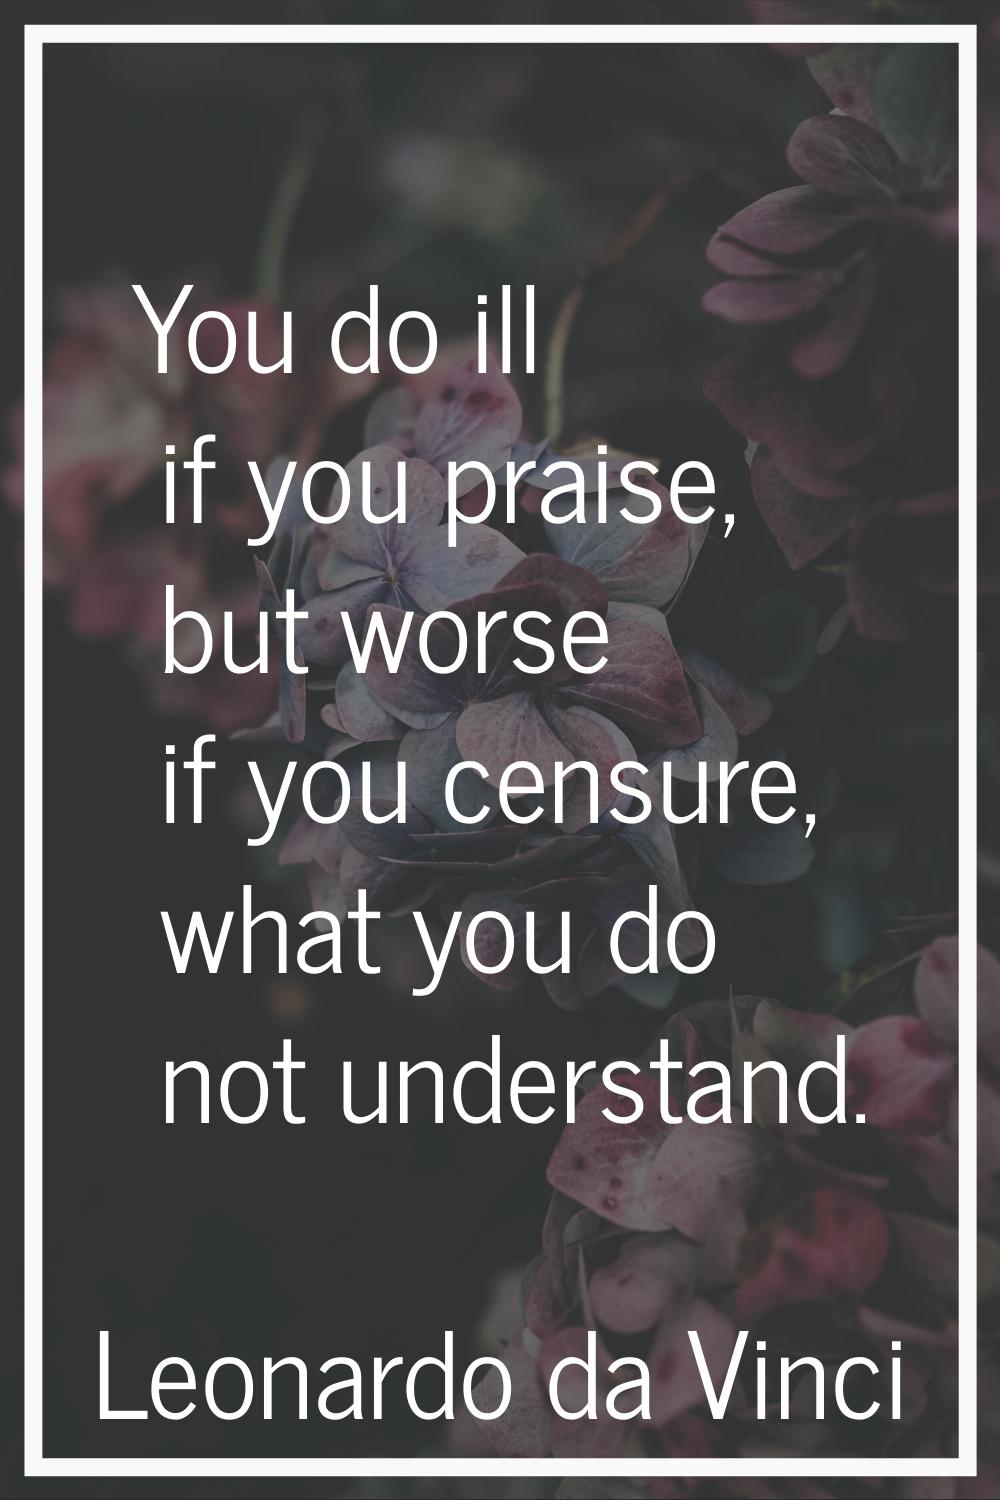 You do ill if you praise, but worse if you censure, what you do not understand.